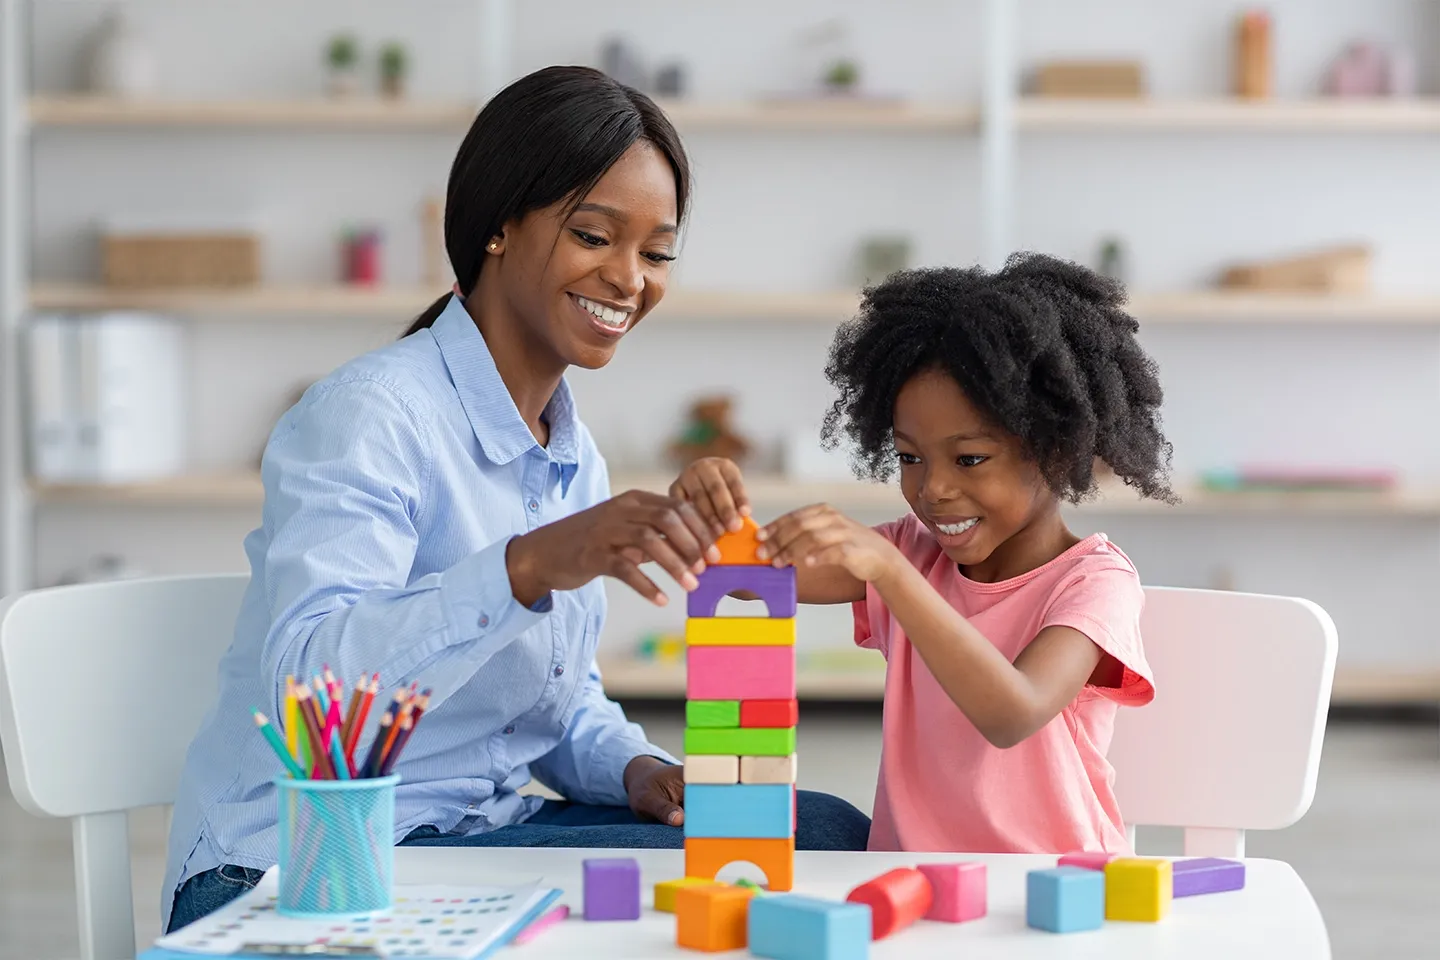 Young black girl and child development specialist playing with building blocks.